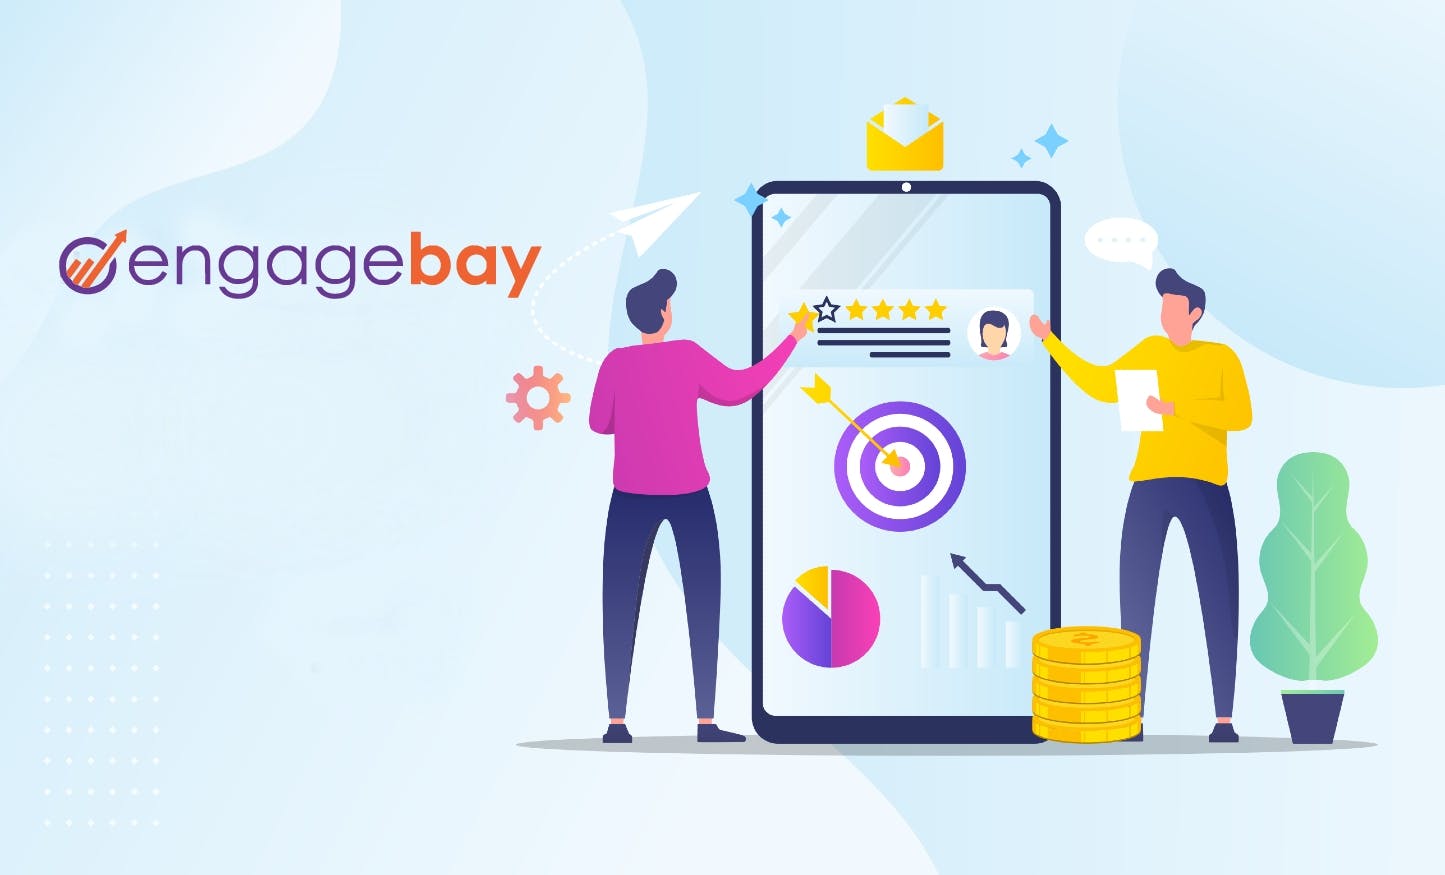 Engagebay CRM: Full Review, Products, and Features